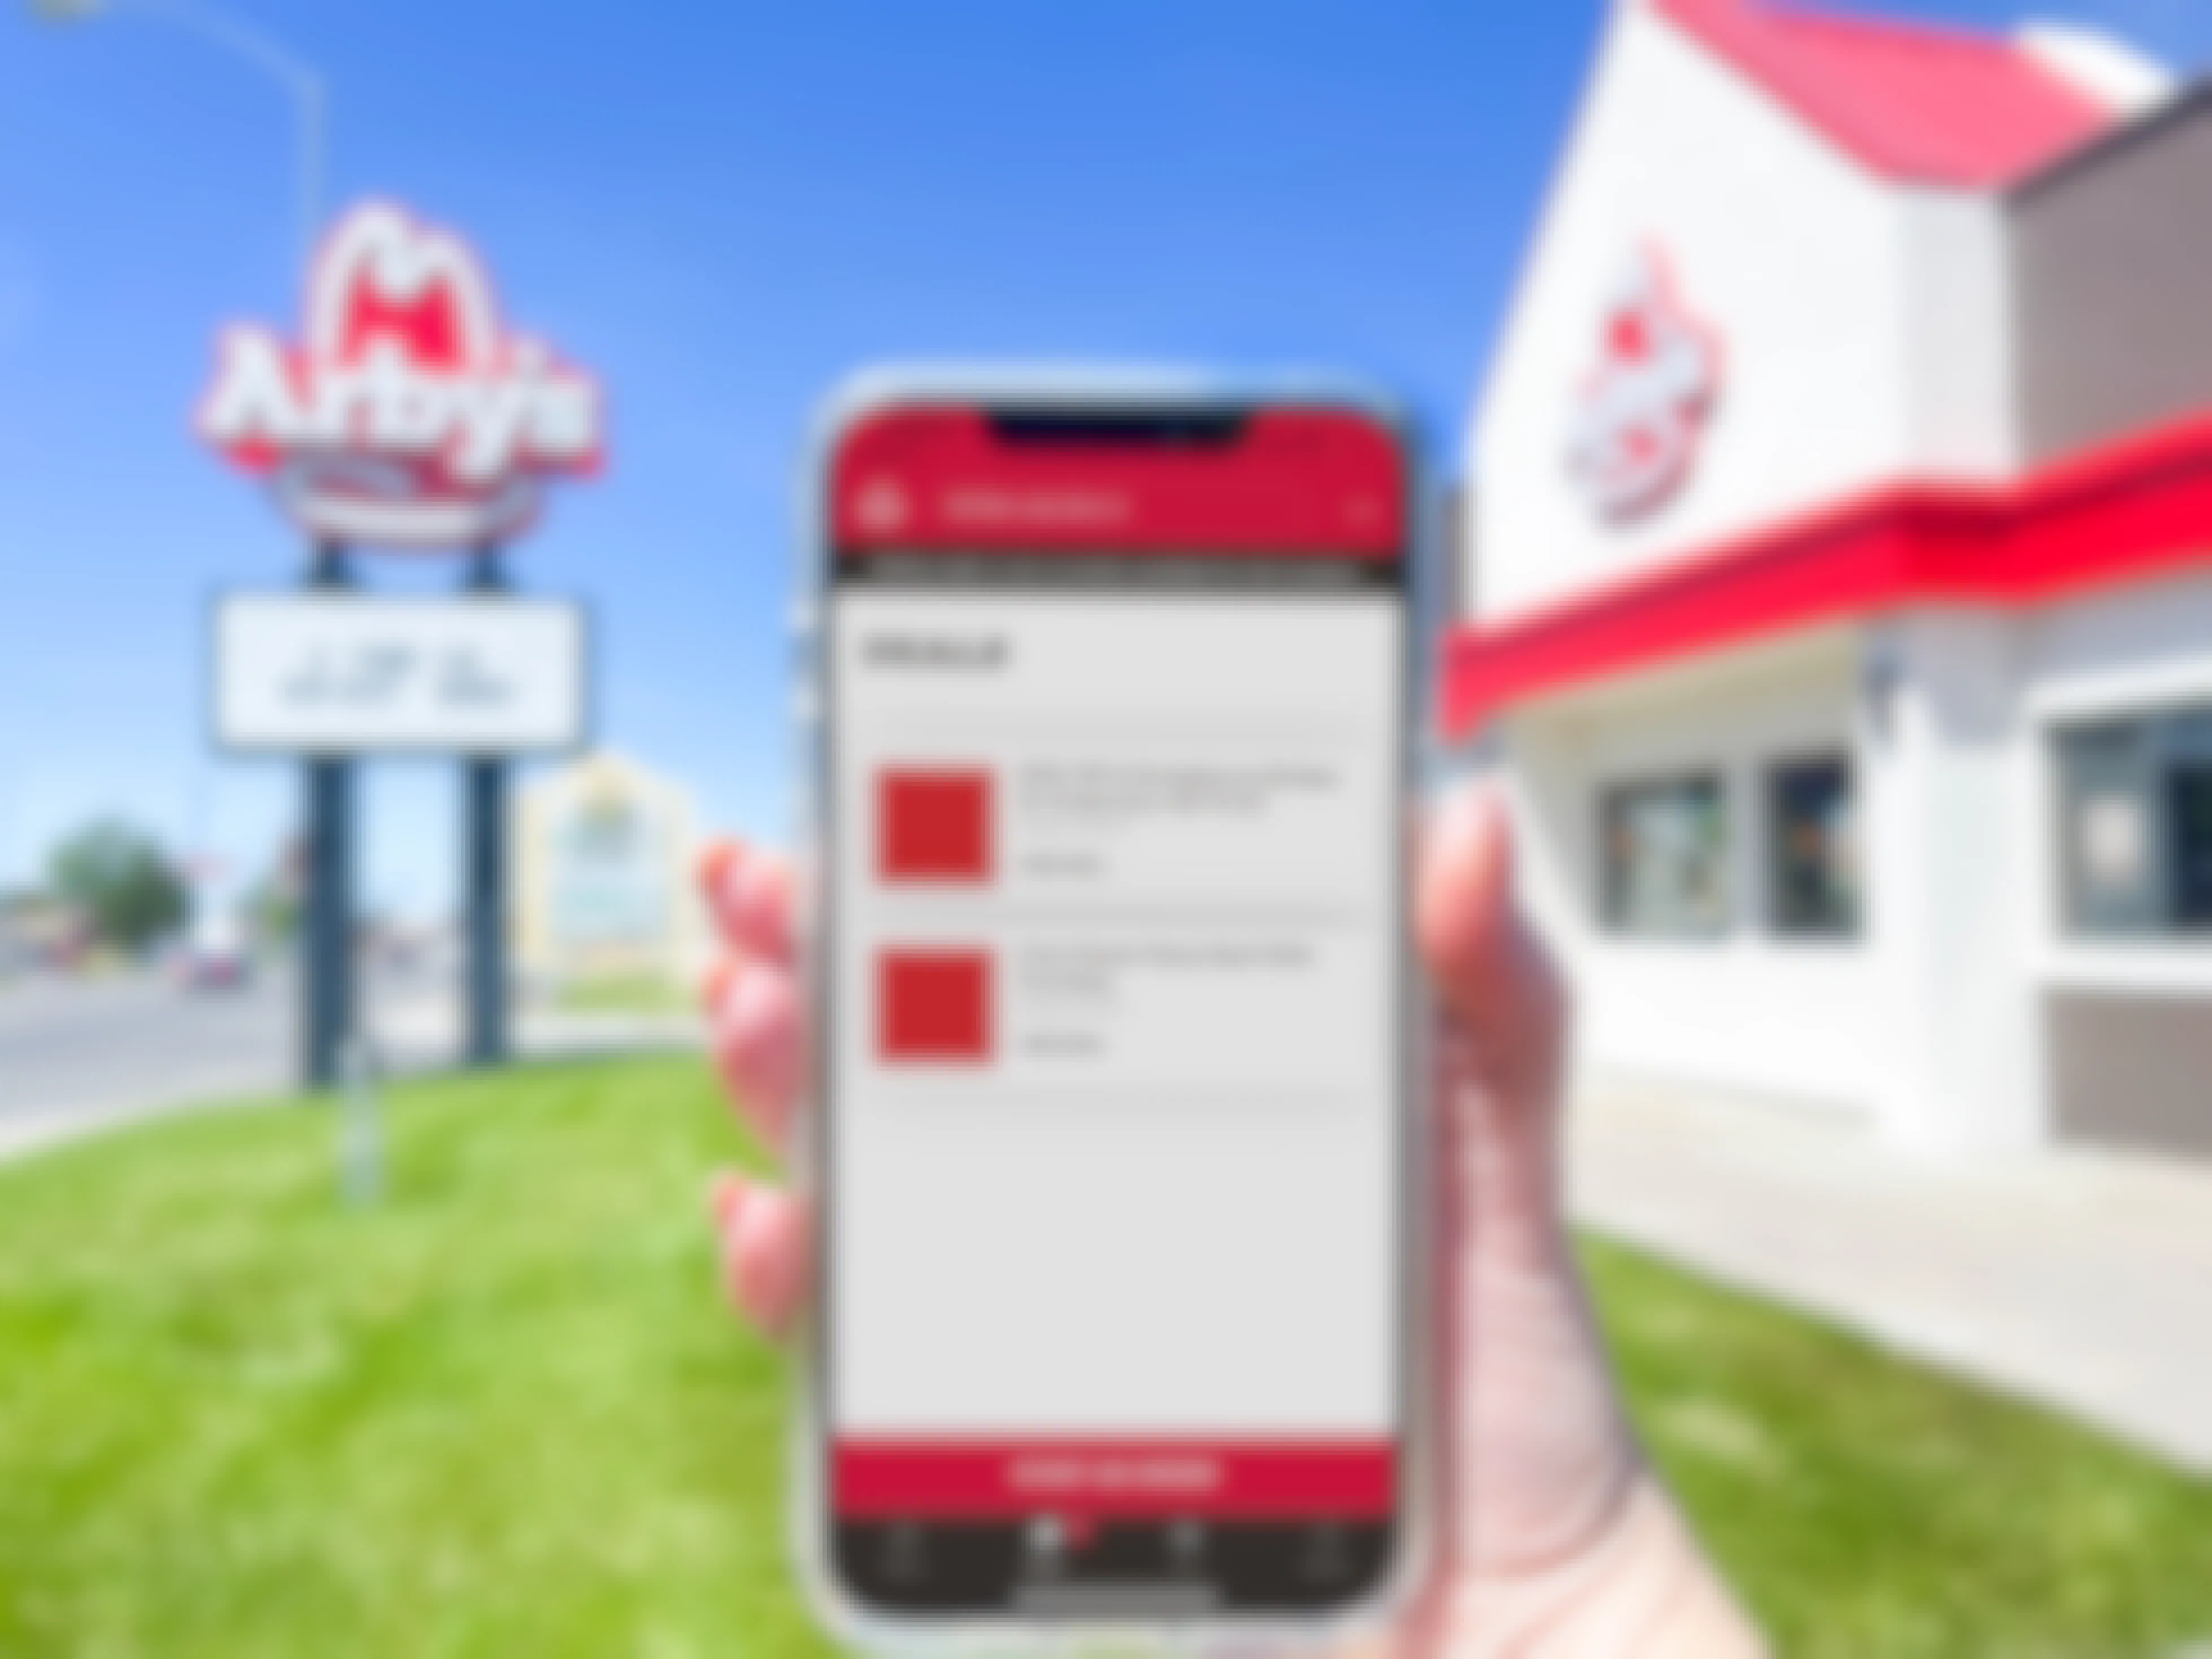 a cellphone being held in front of arbys in front with the arbys app deal page 